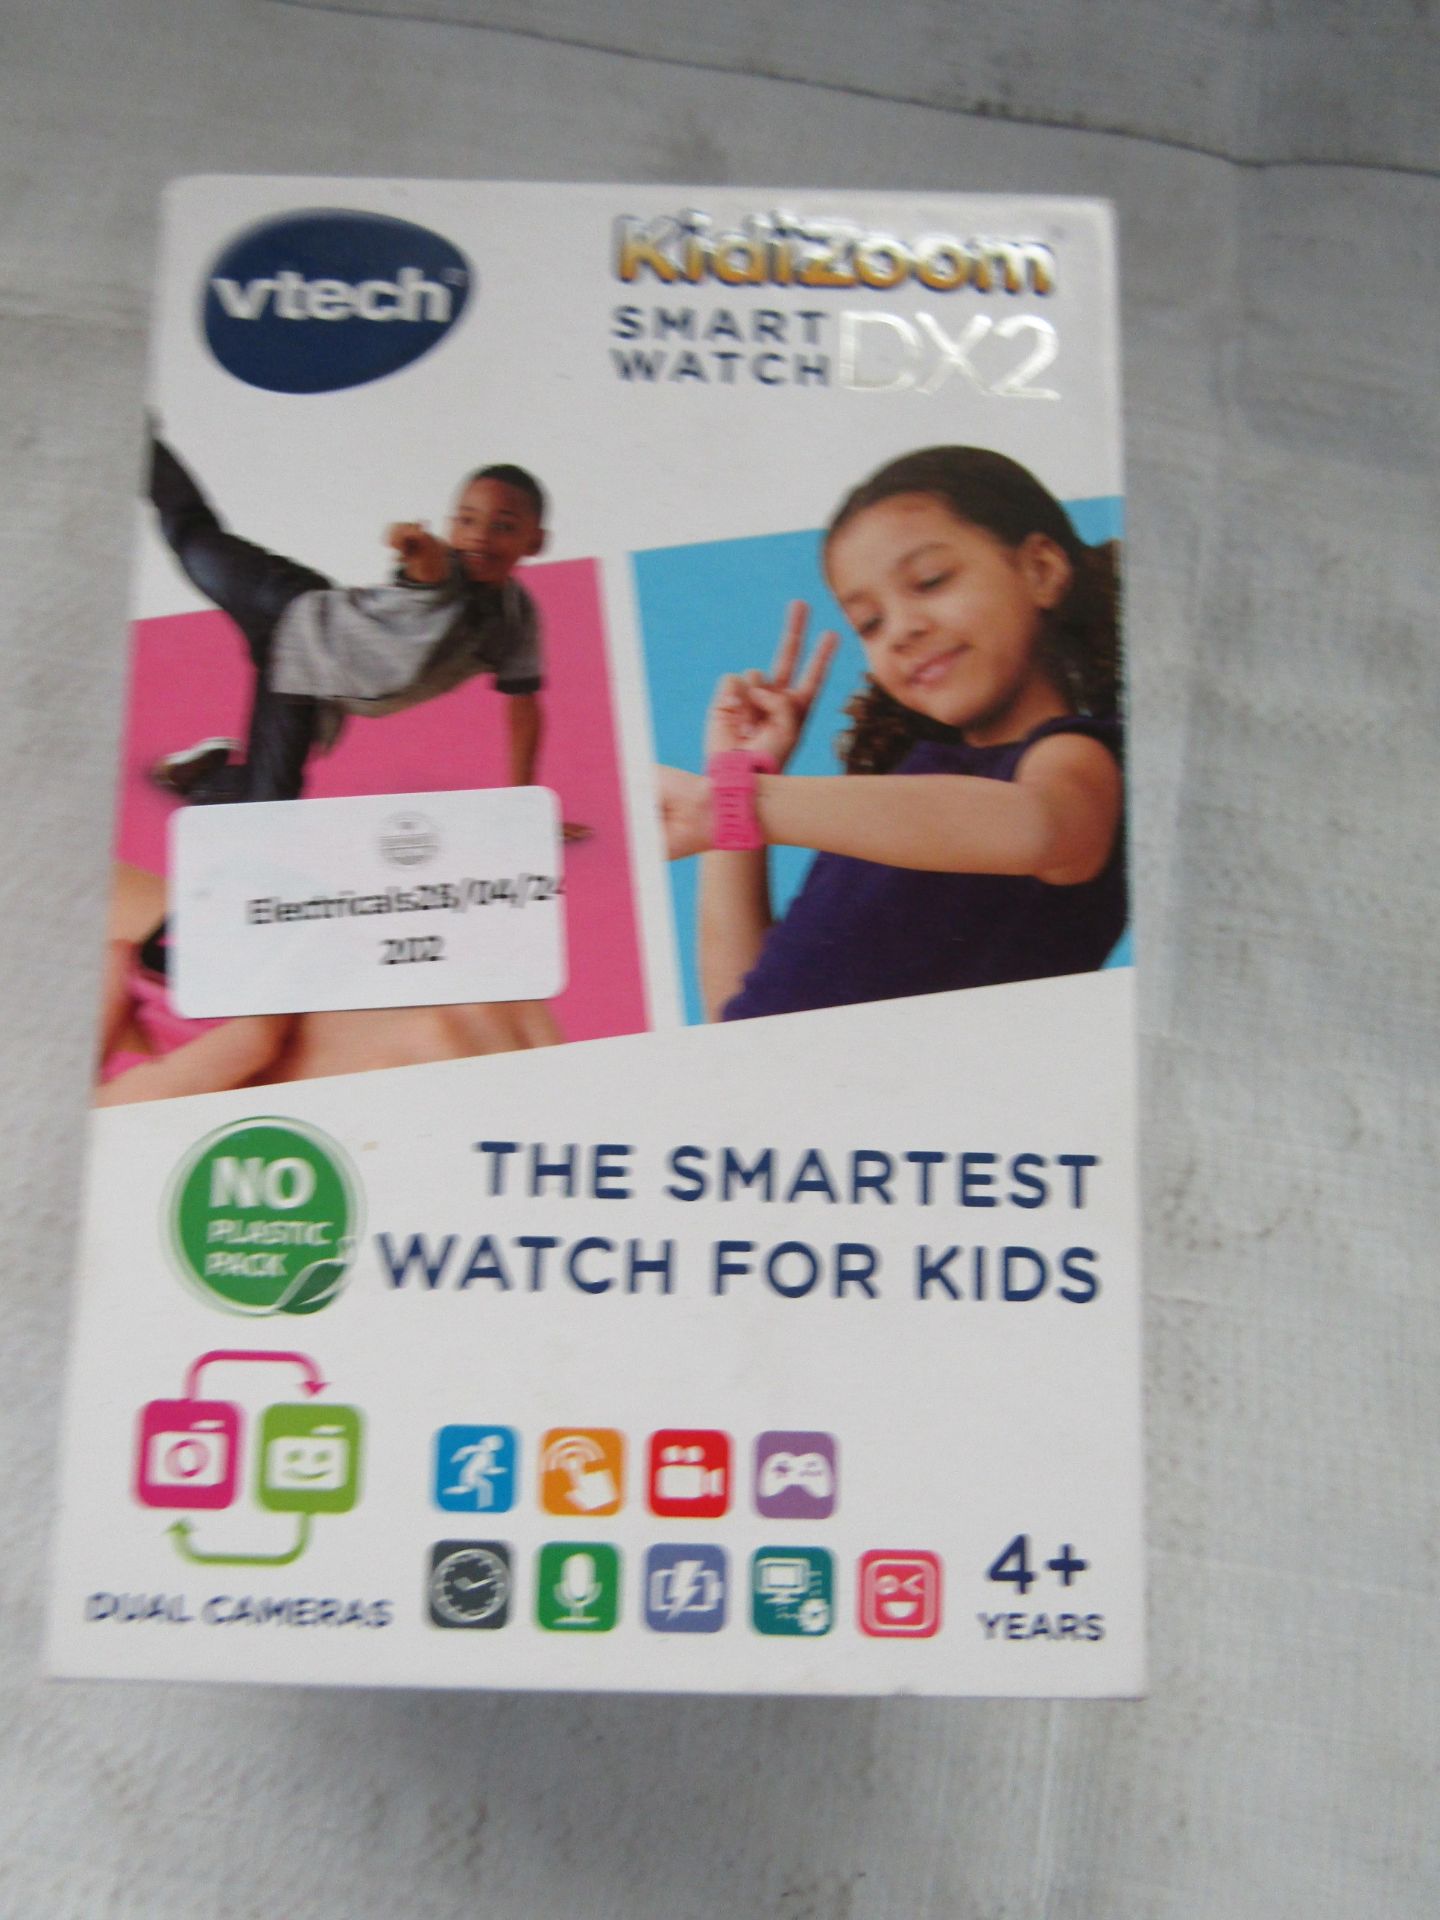 Vtech Kidizoom Smart Watch, DX2, Unchecked & Boxed.